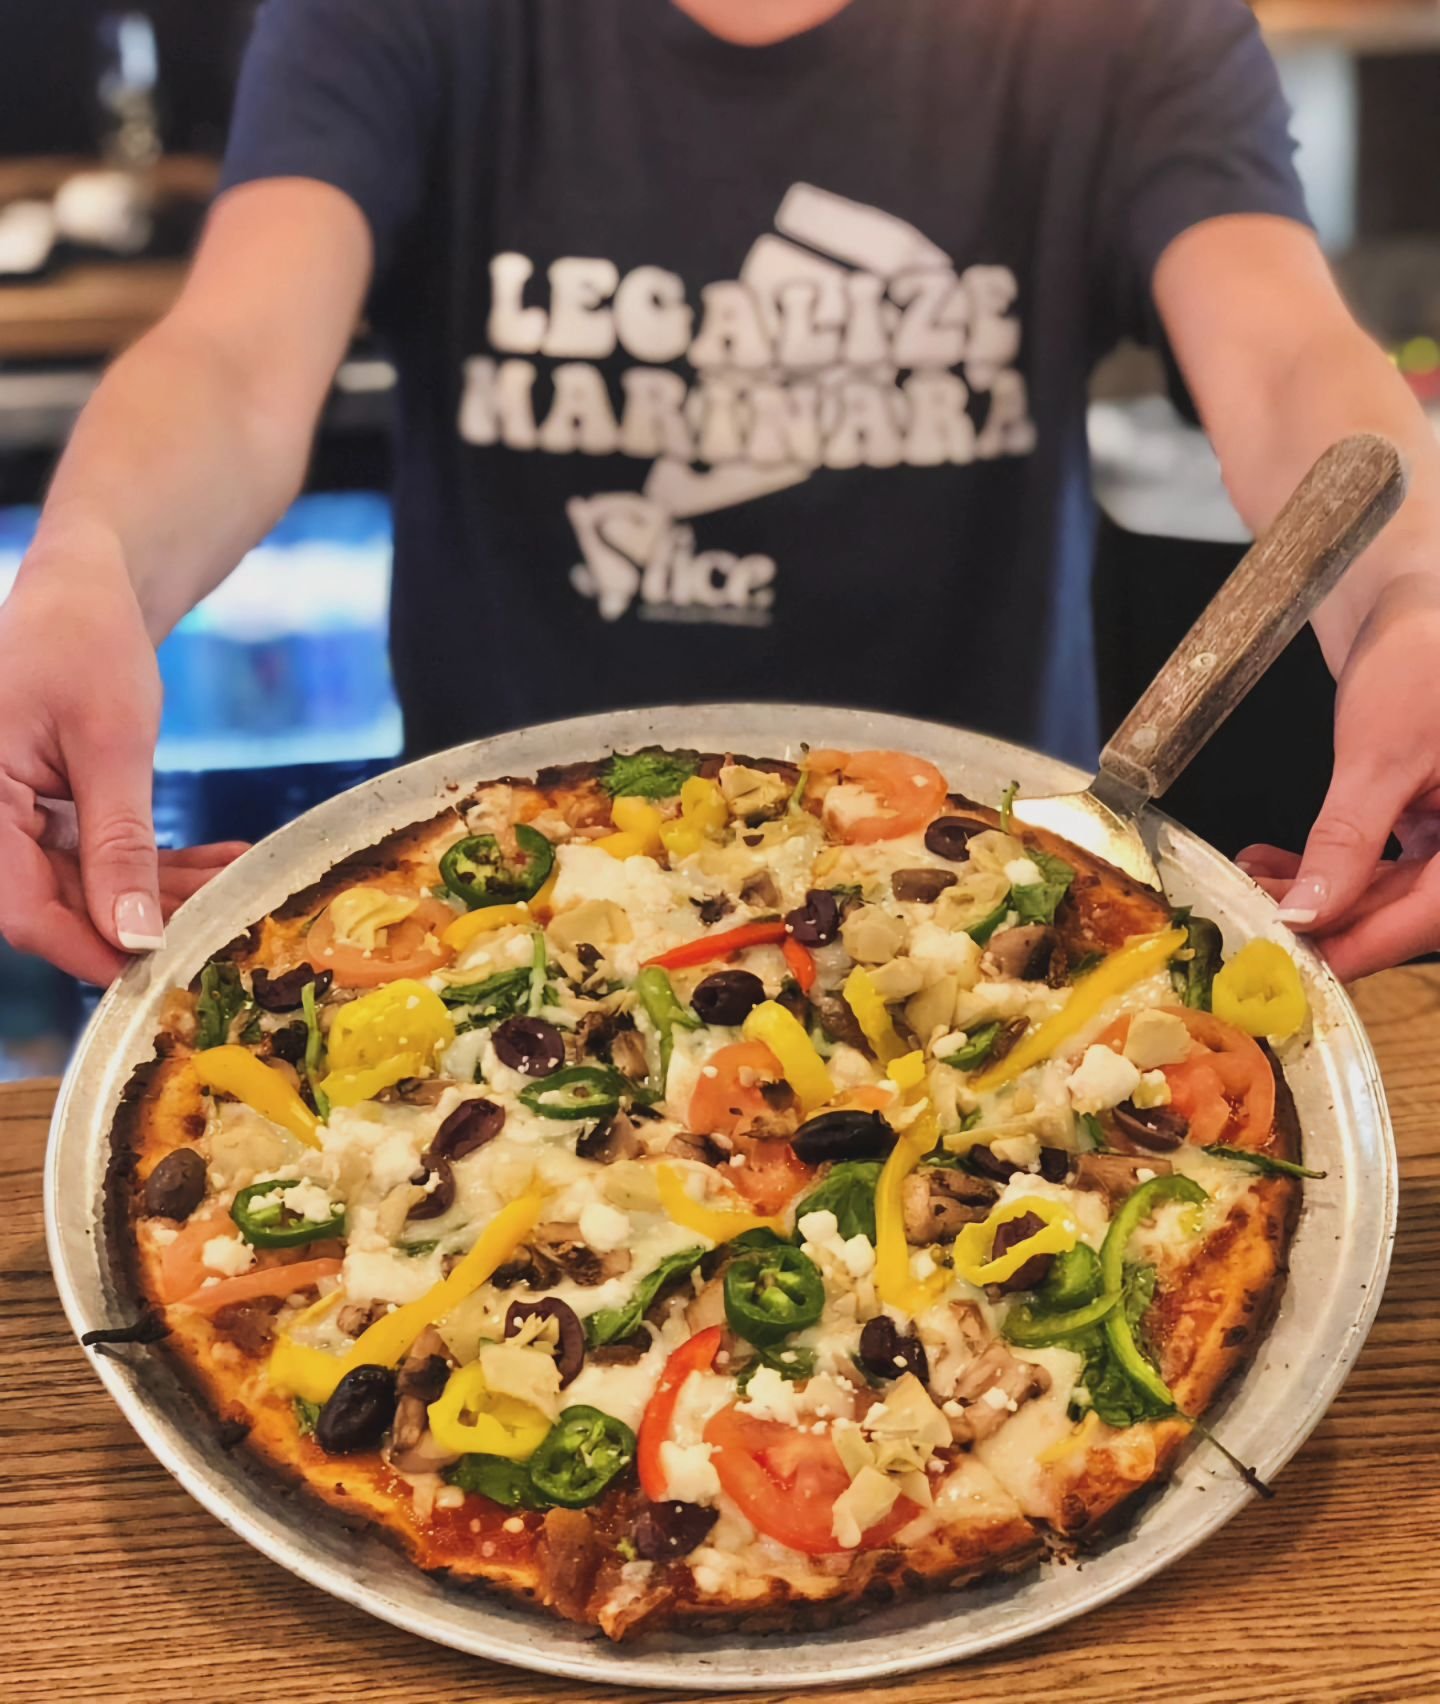 Looking for a healthier option? Order any of our pies on cauliflower crust! One of the most popular ways to enjoy a SLICE! 🍕

Available at ANY of our 5 locations, come drop in for lunch or dinner today! Or visit slicebirmingham.com to place an order